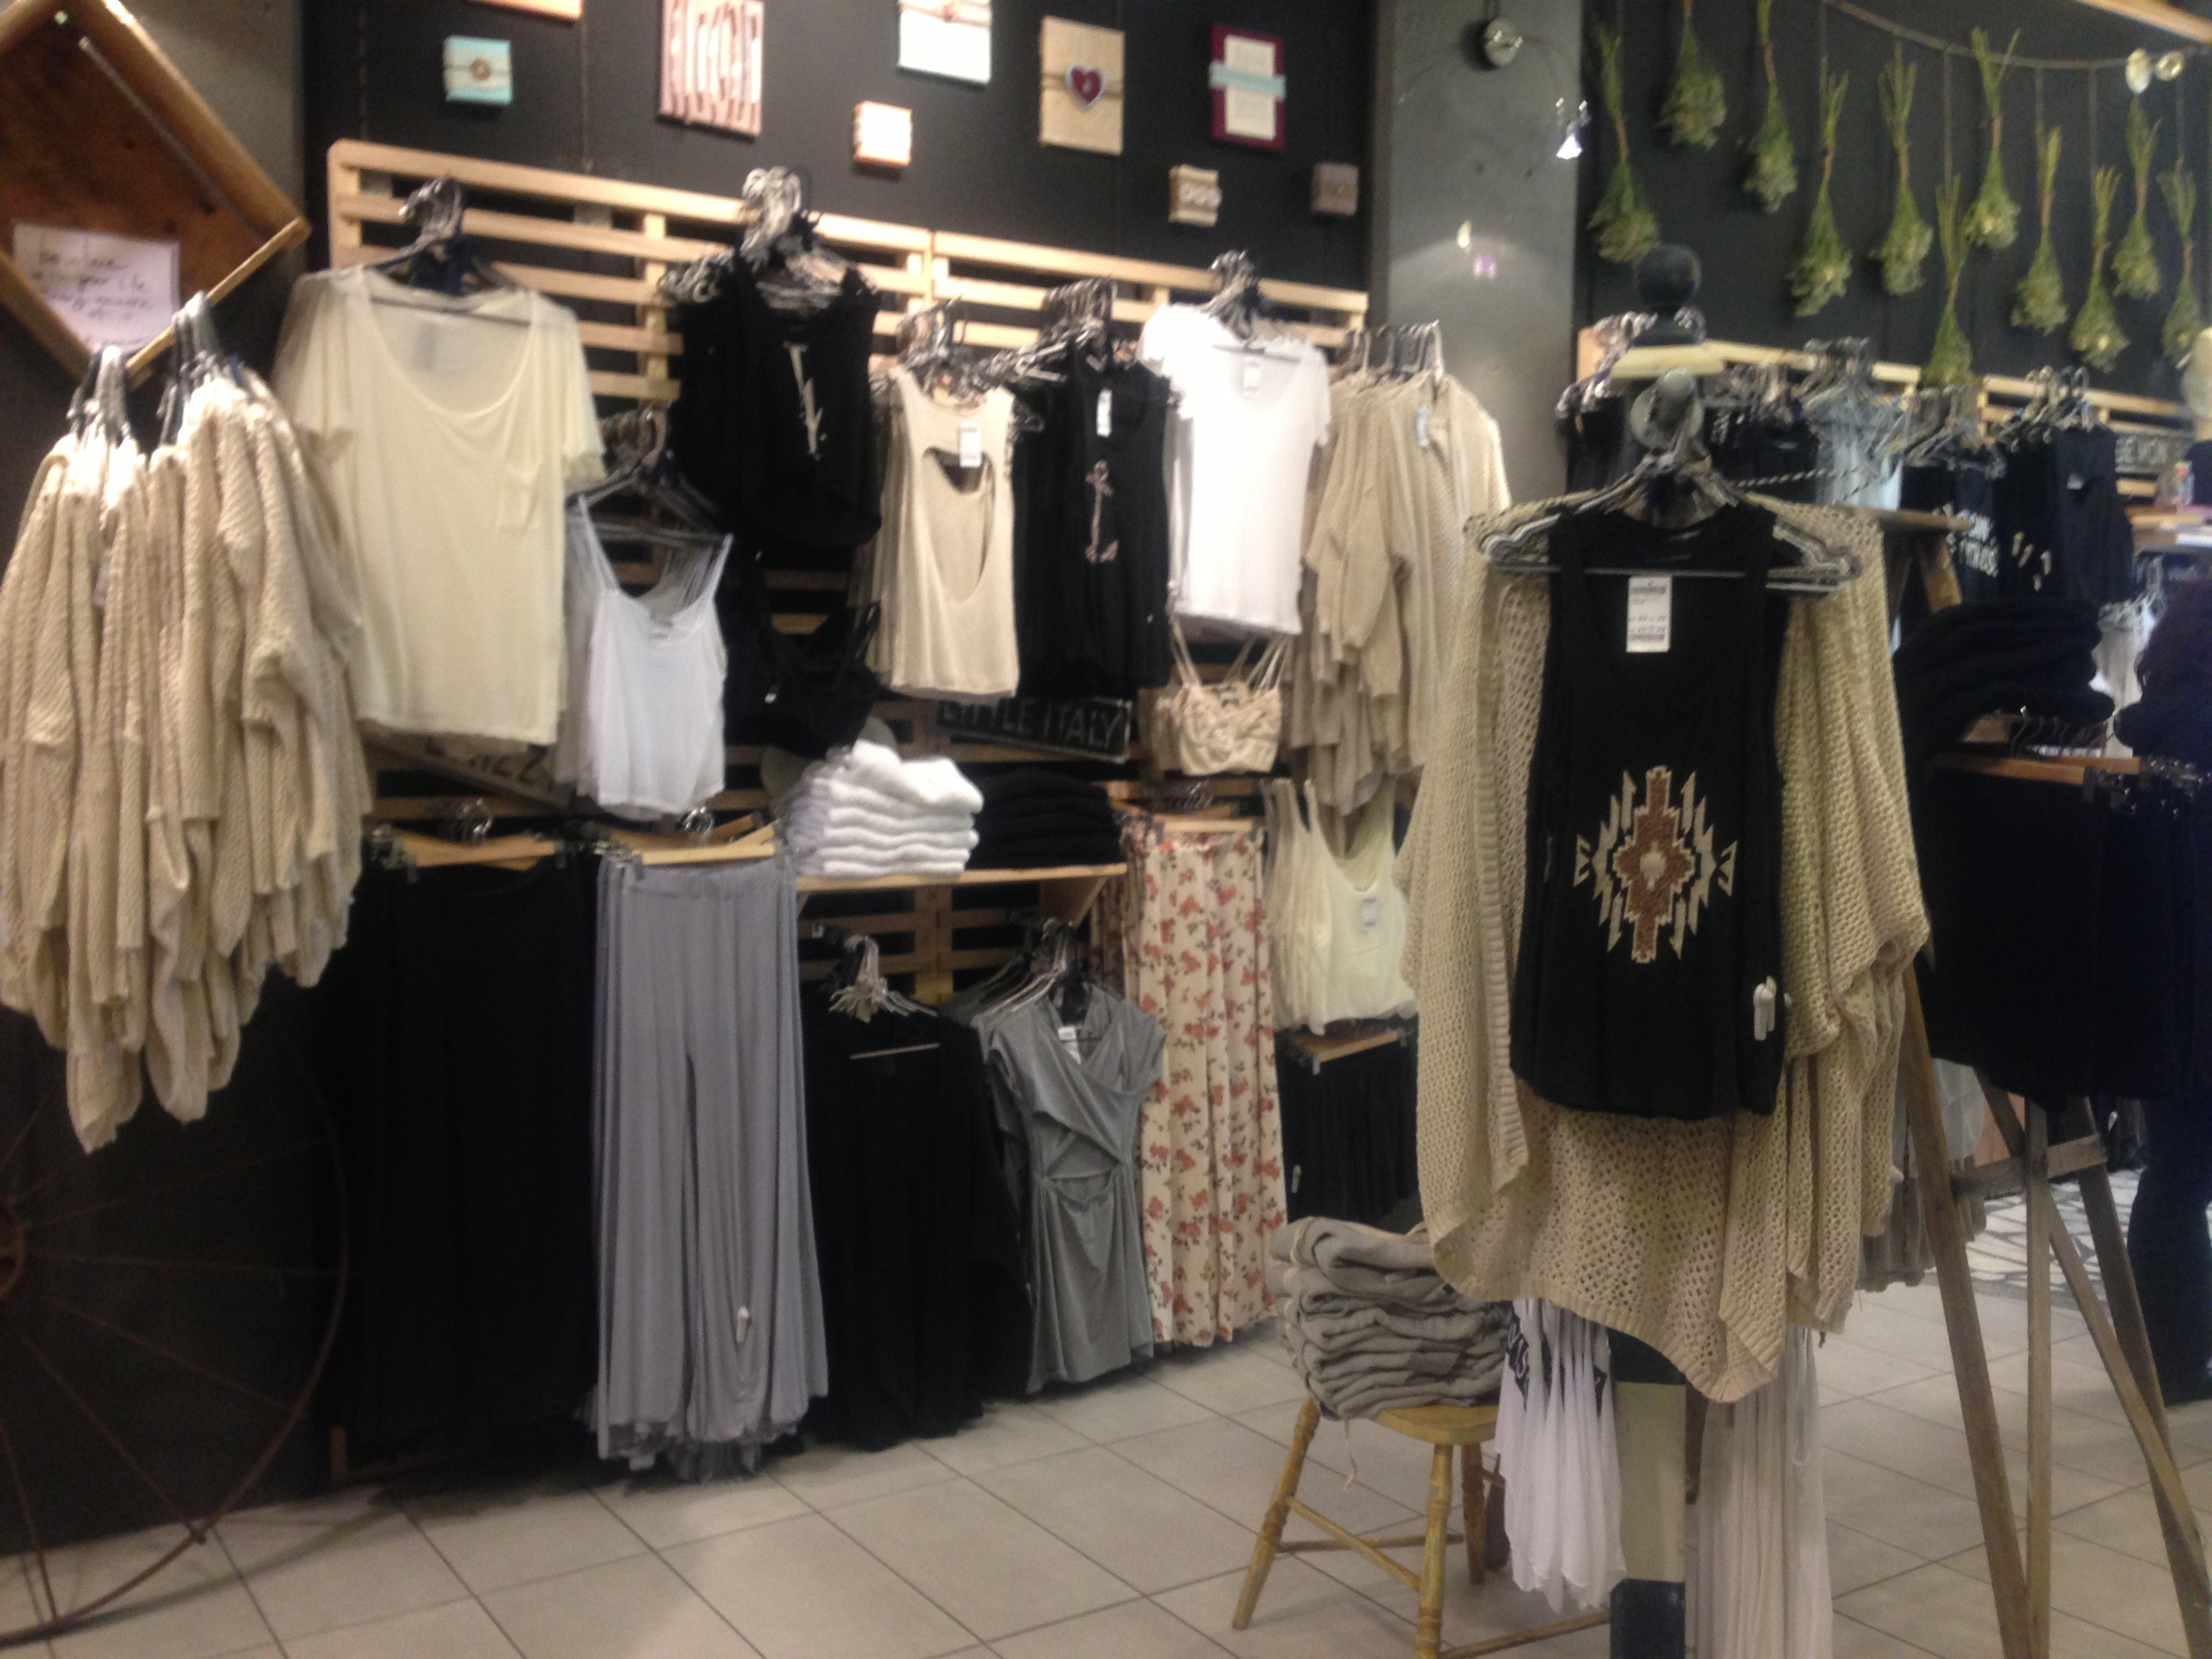 Brandy Melville Women's Clothes for sale in Kingston, Ontario